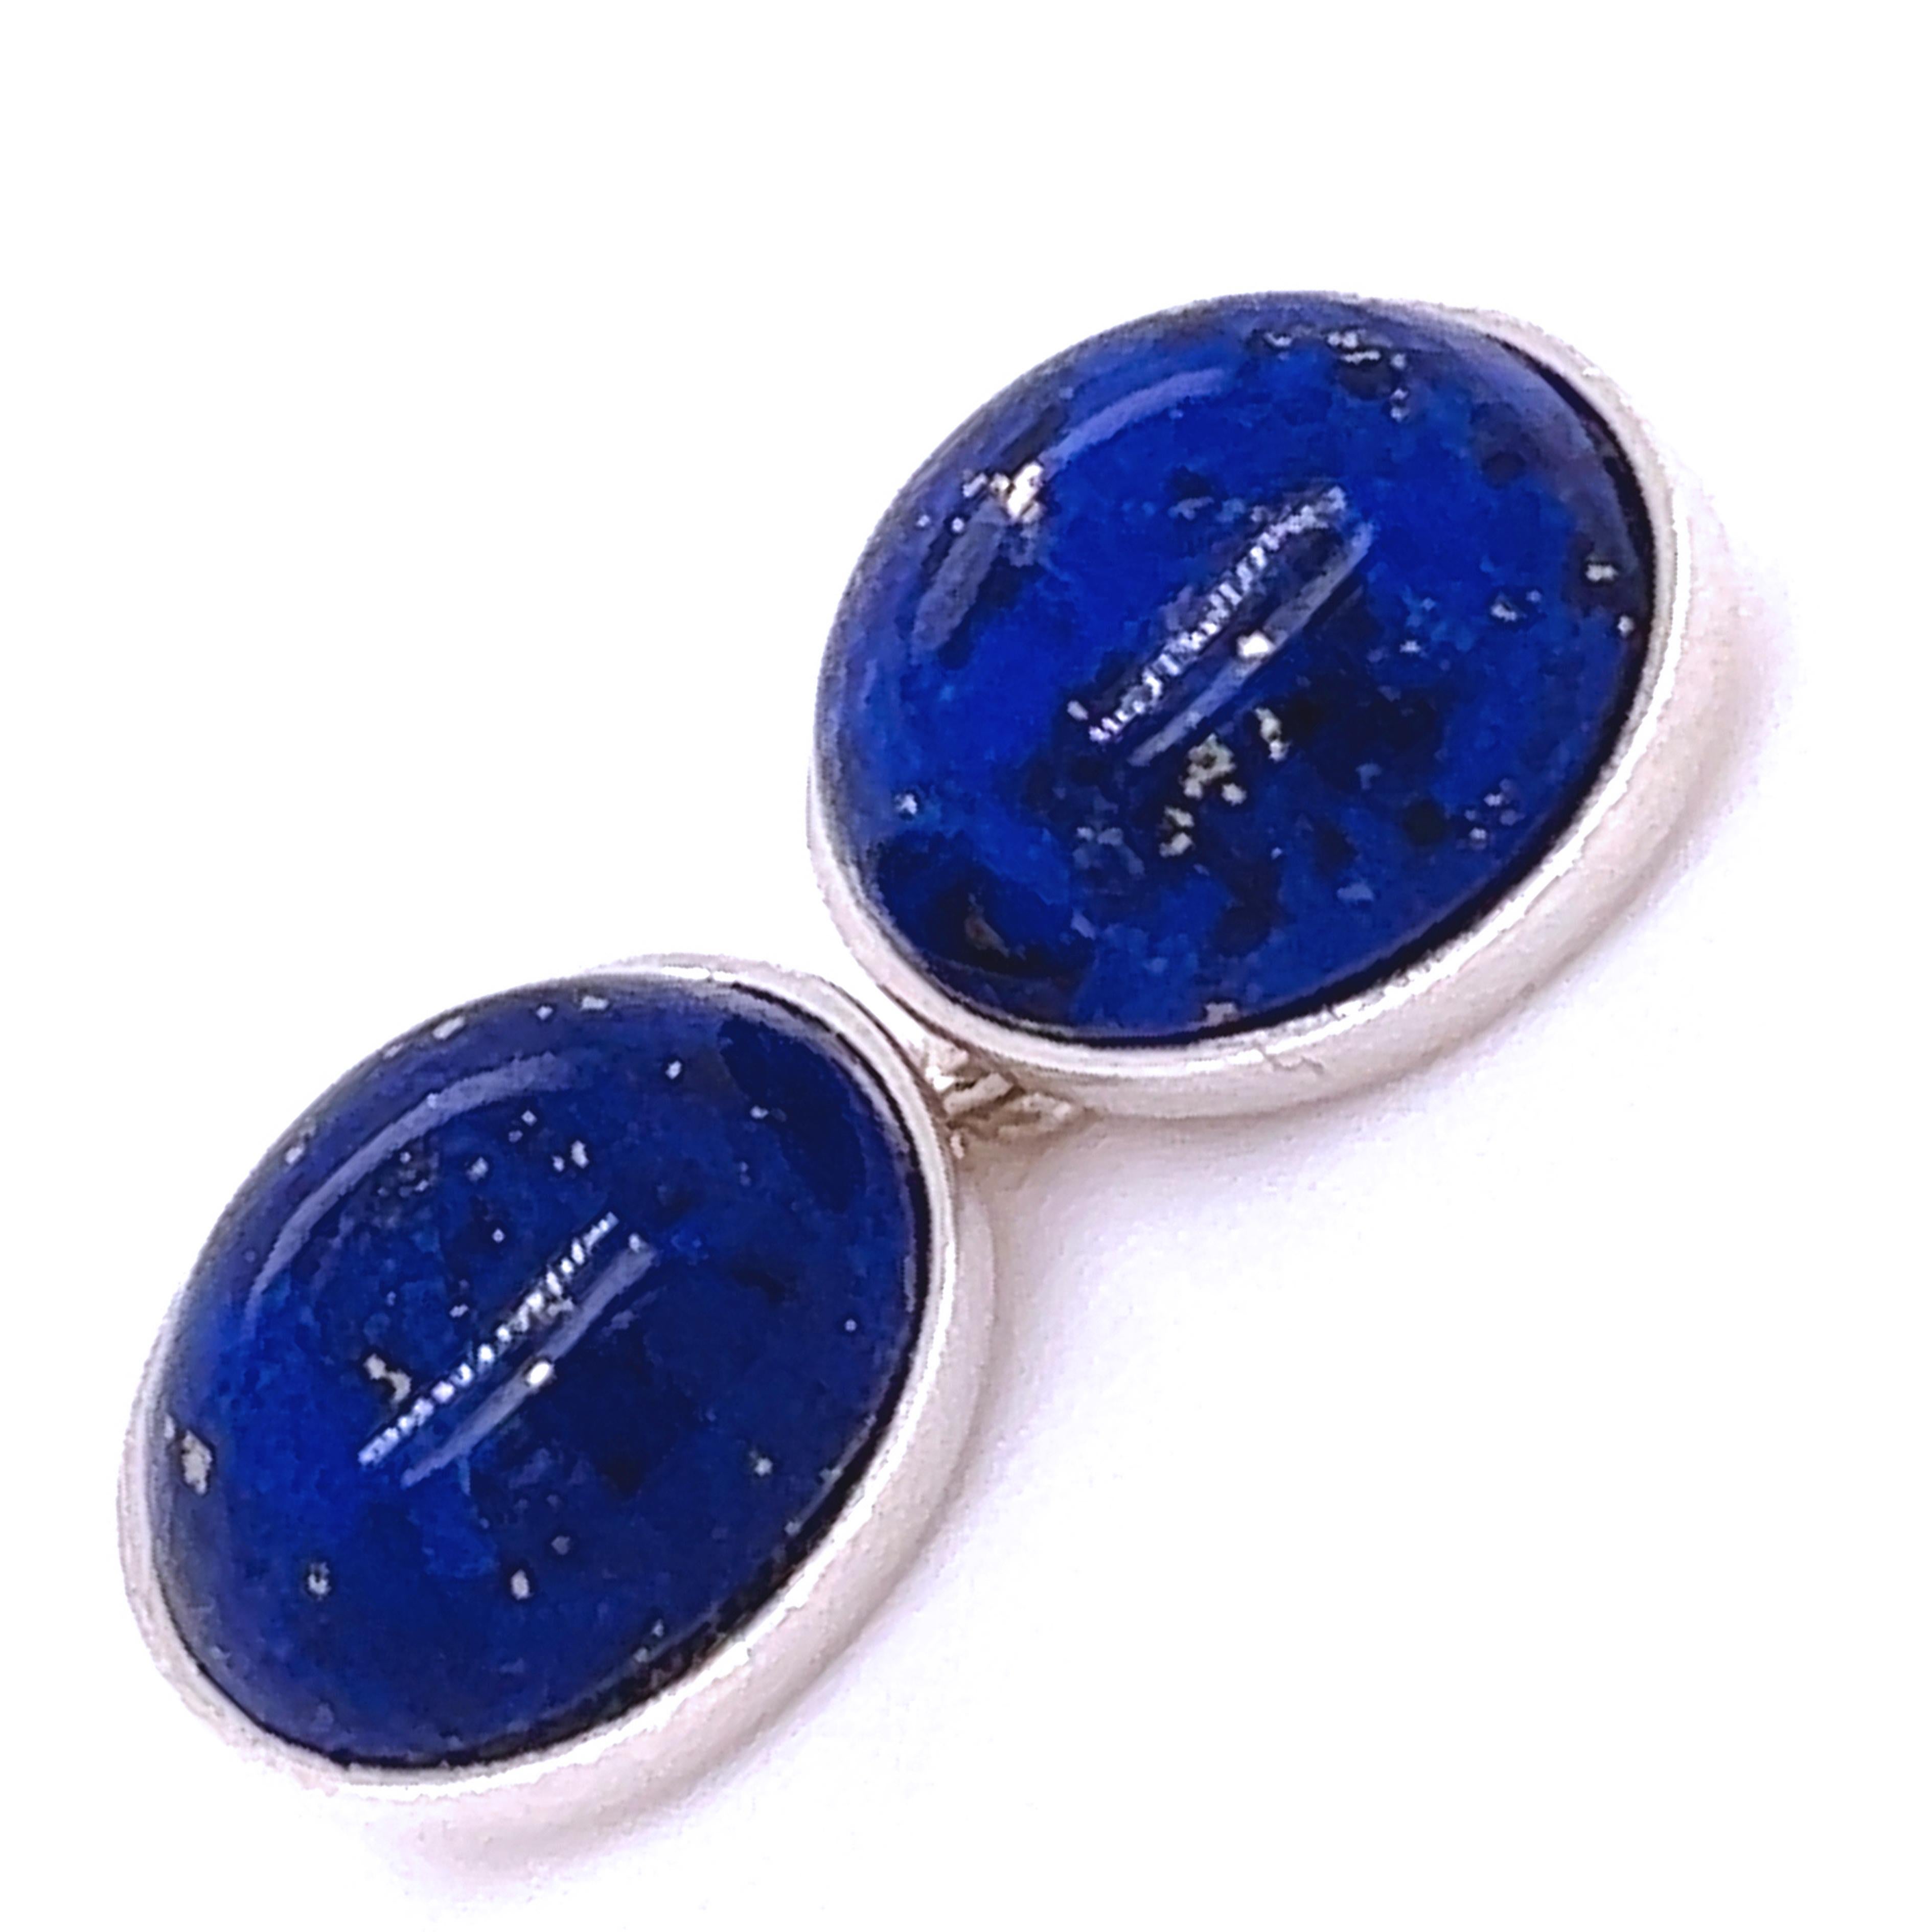 Chic and Timeless, Natural Hand Inlaid lapis Lazuli Cabochon Oval Shaped Sterling Silver Cufflinks.
In our smart fitted Tobacco Suede Leather Case and Pouch.

